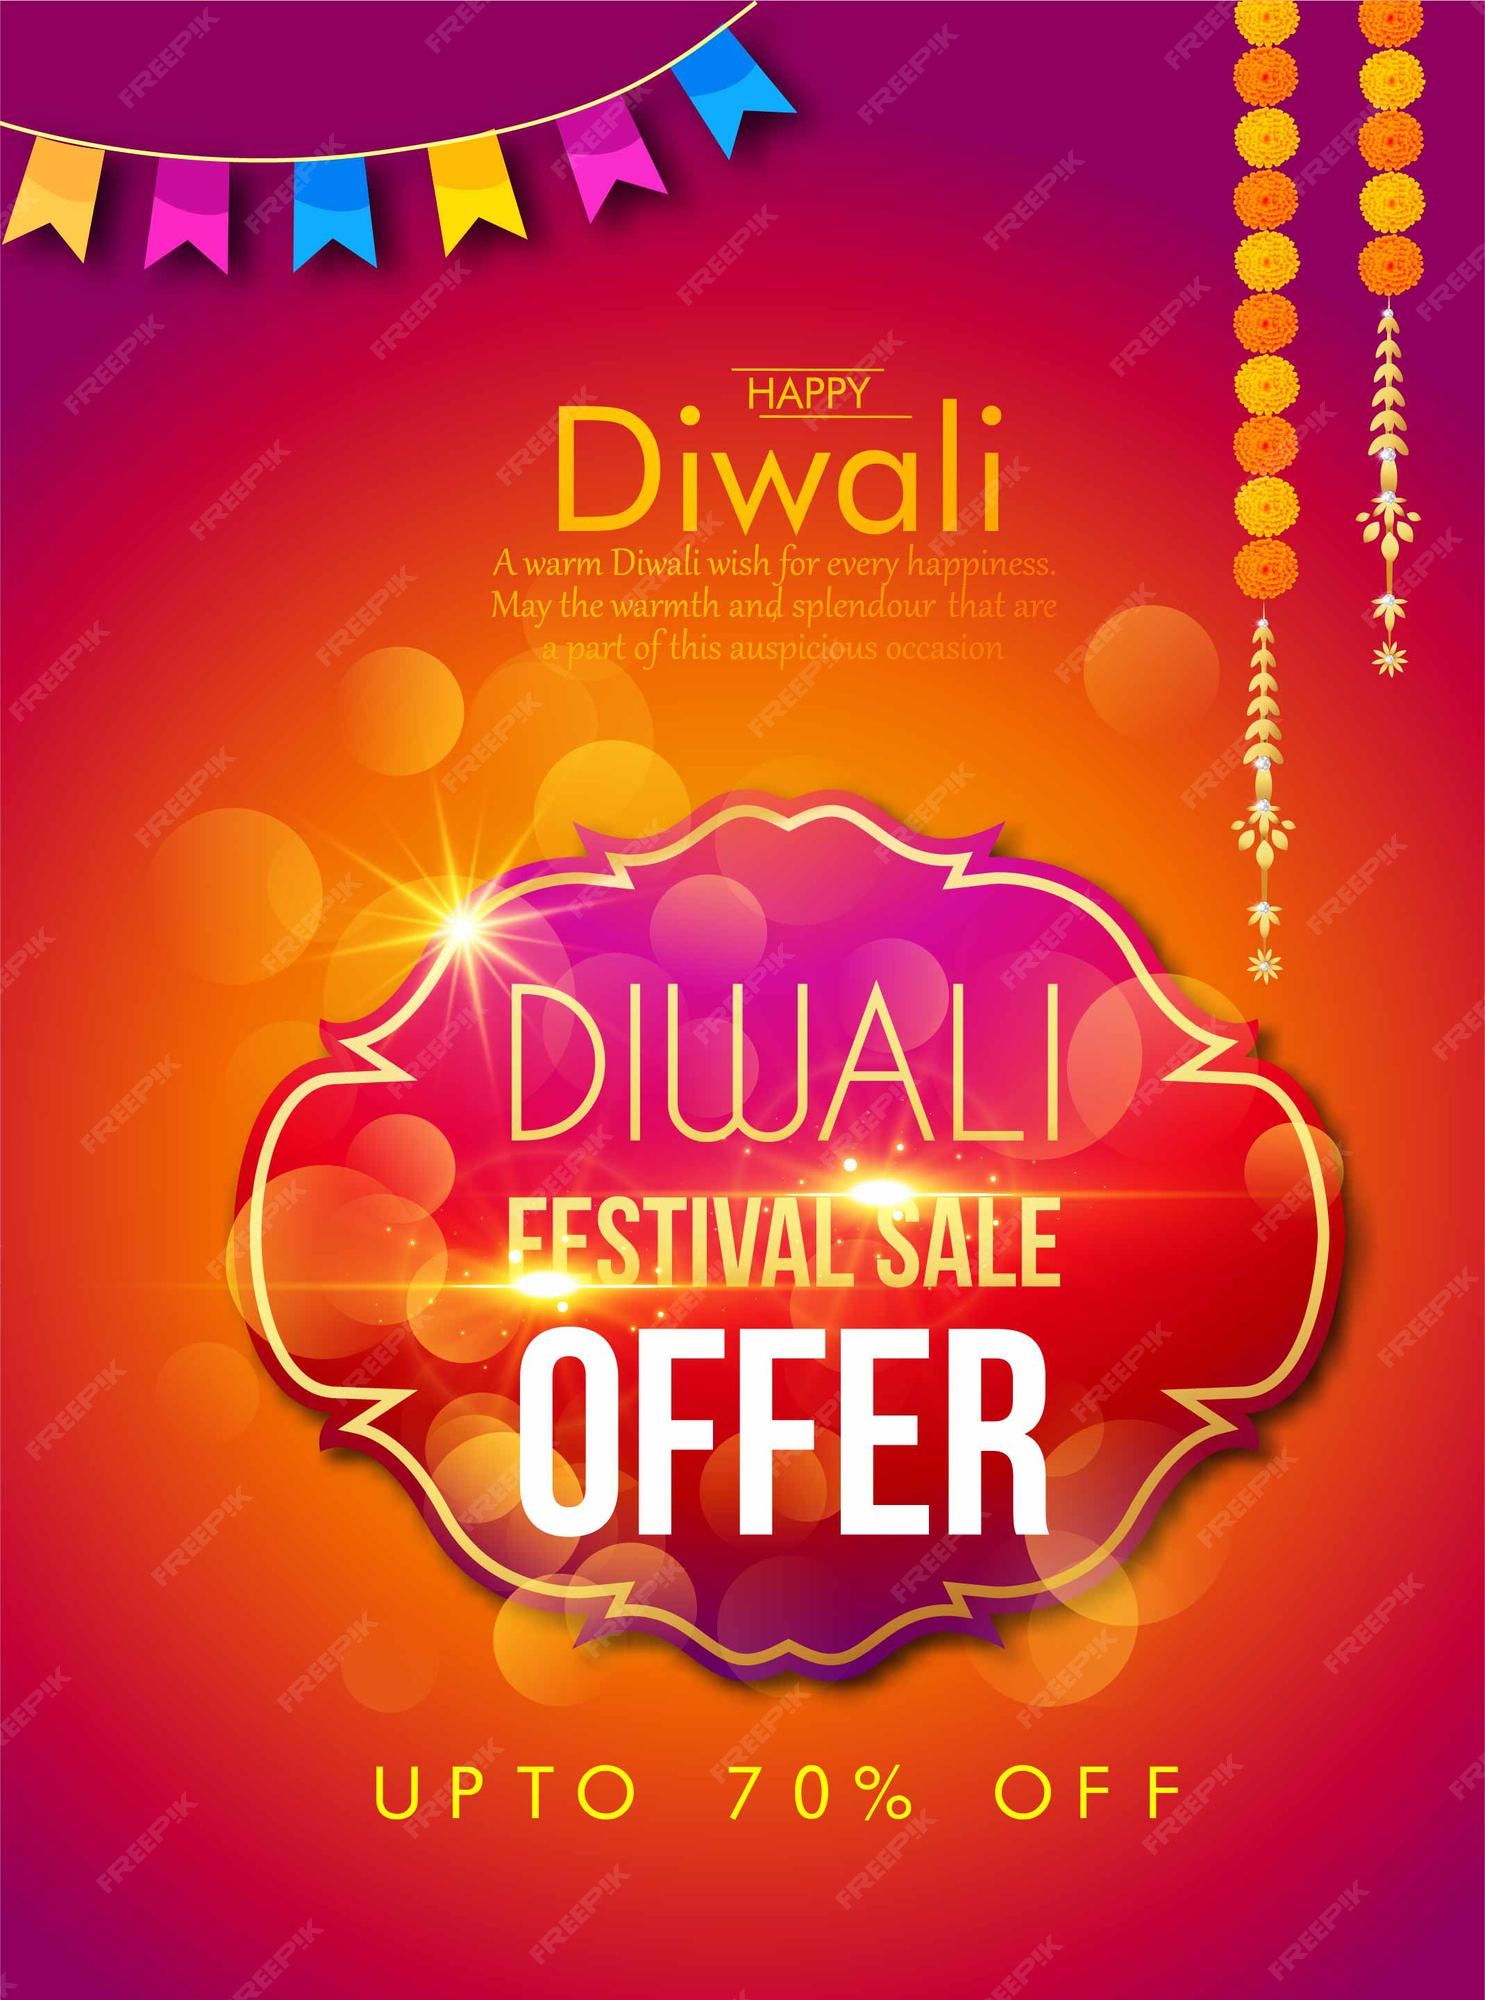 Premium Vector | Abstract grand diwali dhamaka sale background with offer  details banner or sale poster happy diwali